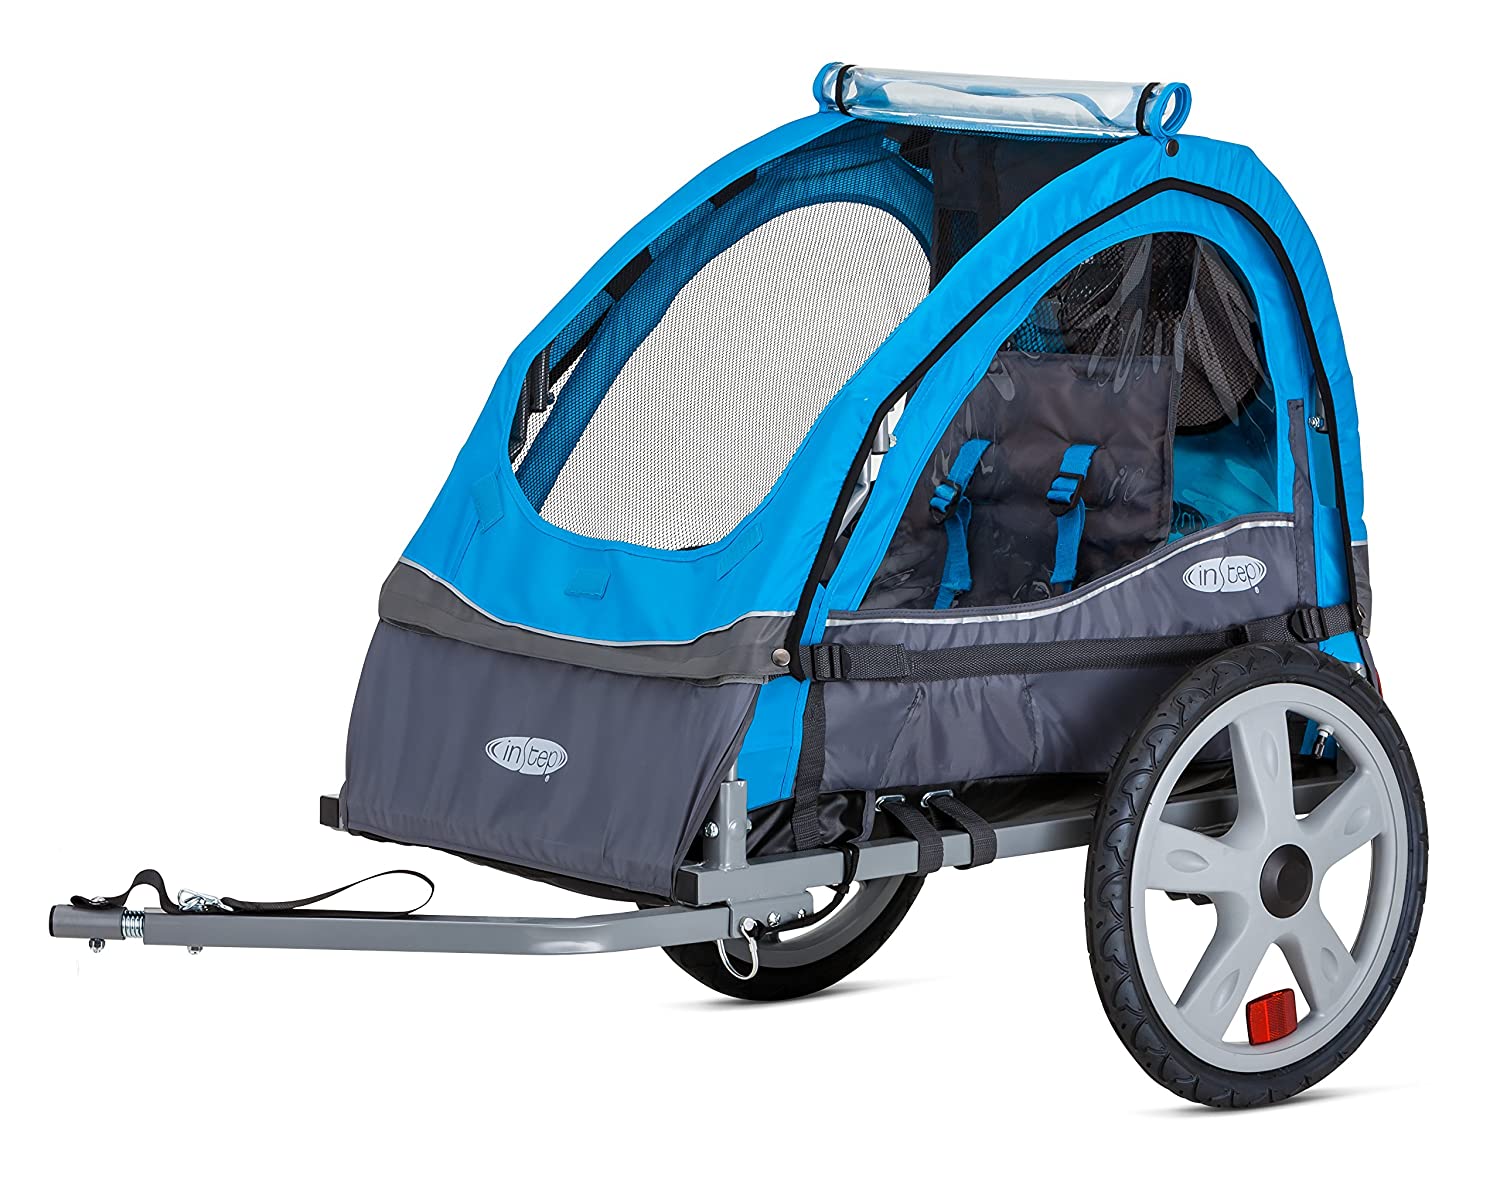 InStep Single Seat and Double Seat Foldable Tow Behind Bike Trailers, Featuring 2-in-1 Canopy and 16-Inch Wheels, for Kids and Children, Multiple Colors Available